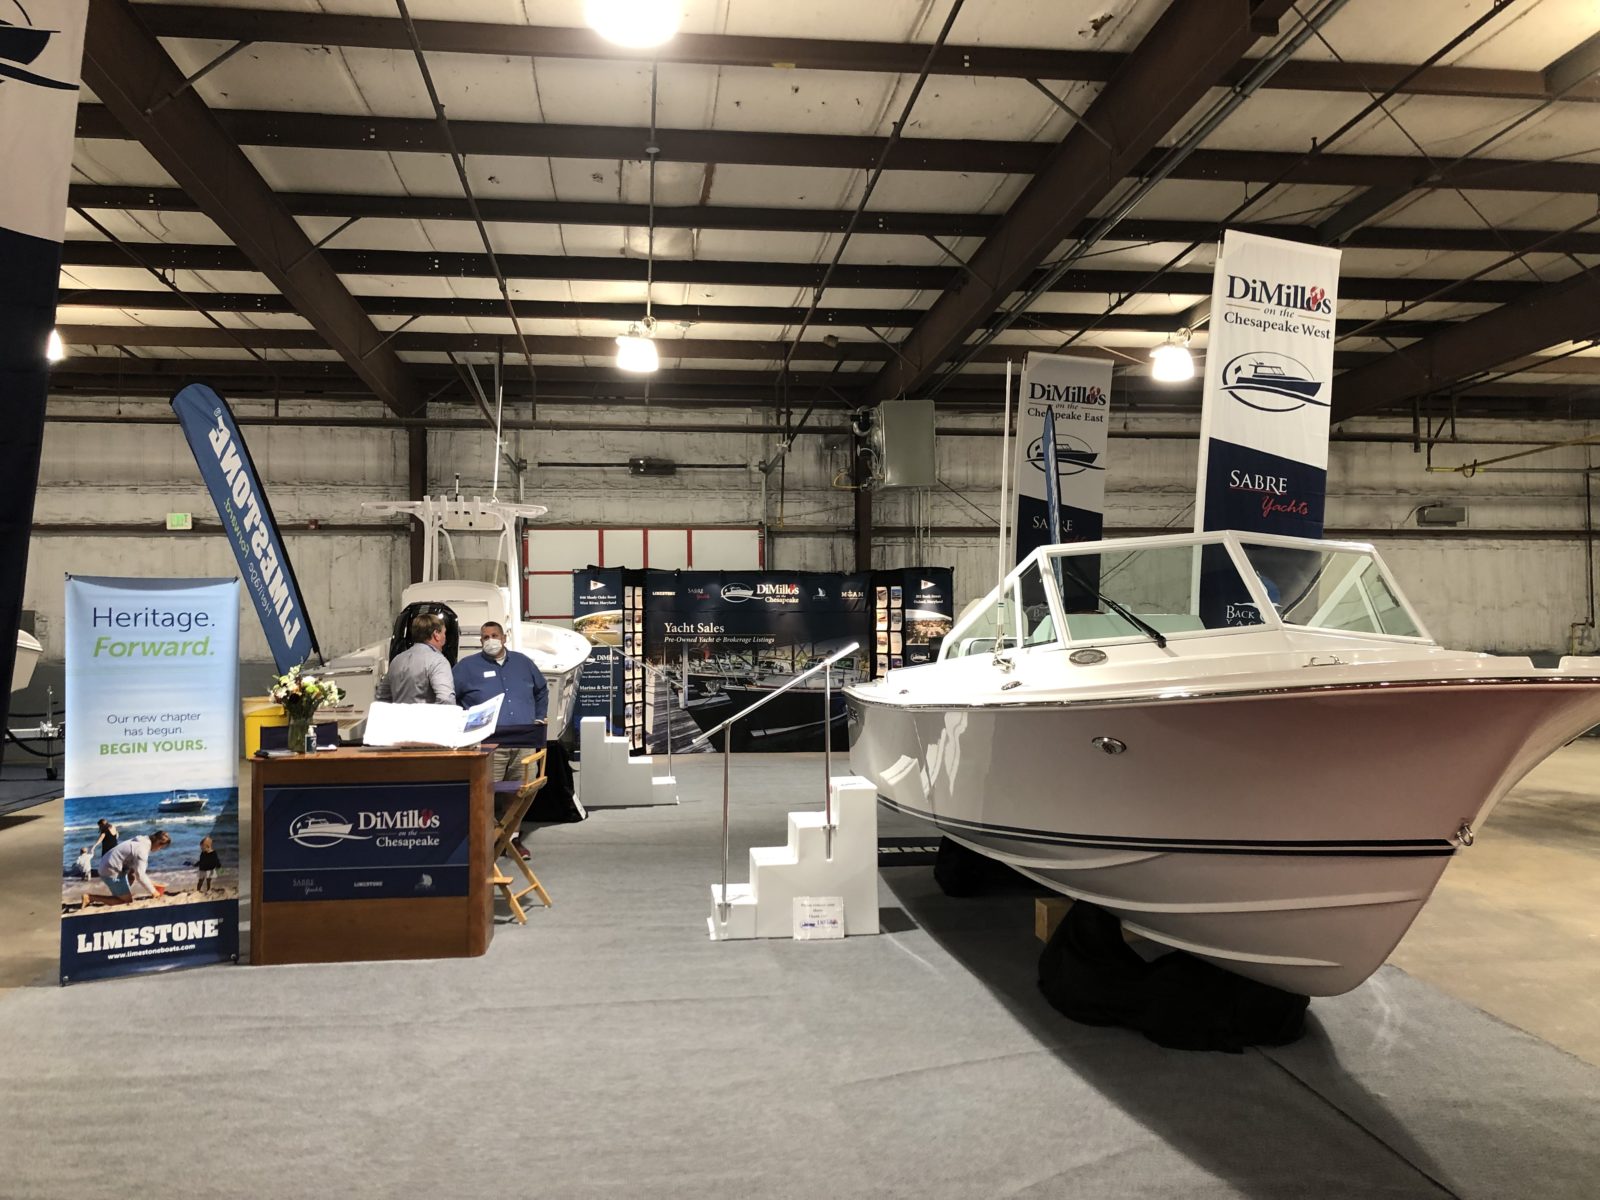 The First Annual Chesapeake Bay Boat Show is Open! DiMillo's Yacht Sales